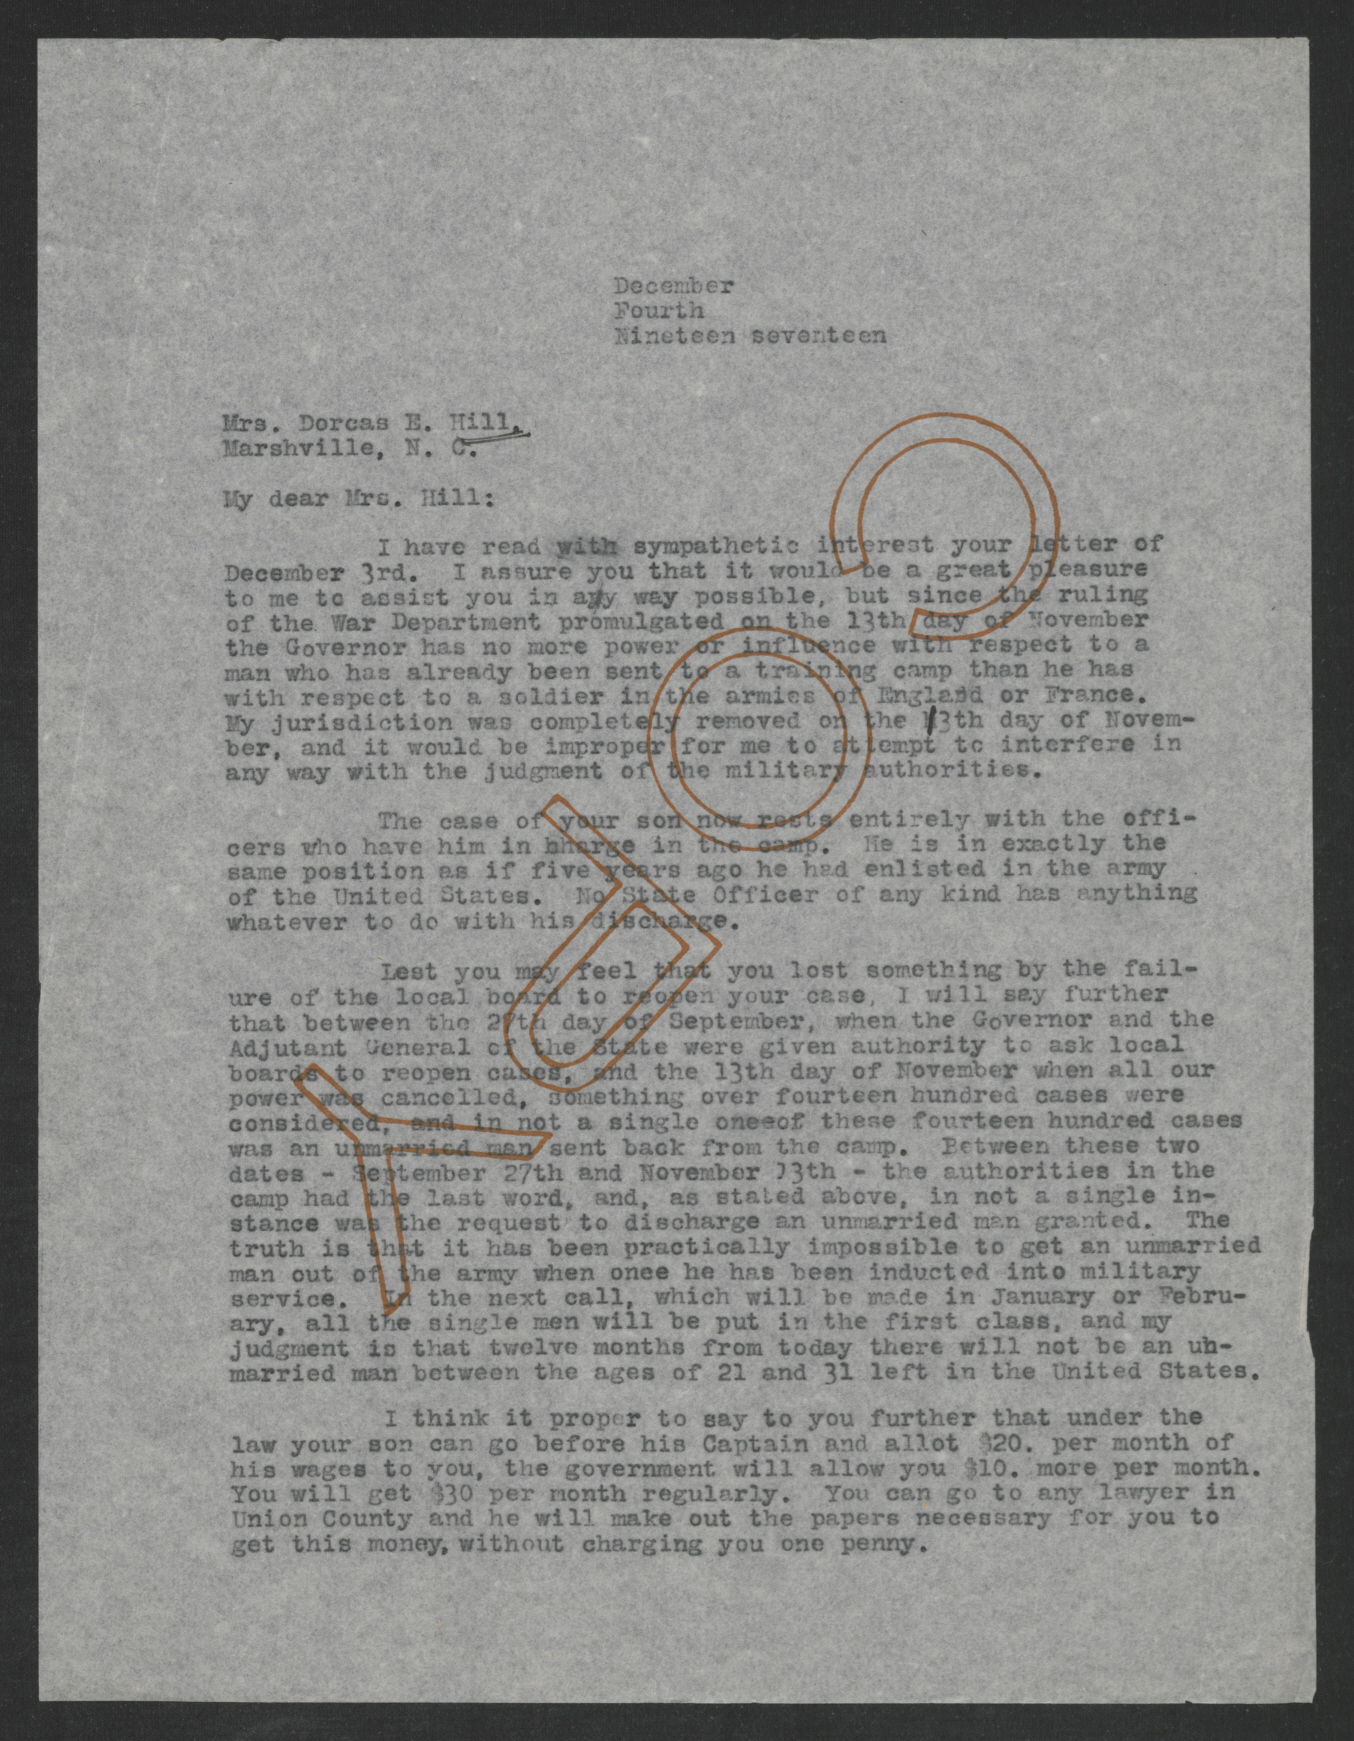 Letter from Thomas W. Bickett to Dorcas E. Hill, December 4, 1917, page 1